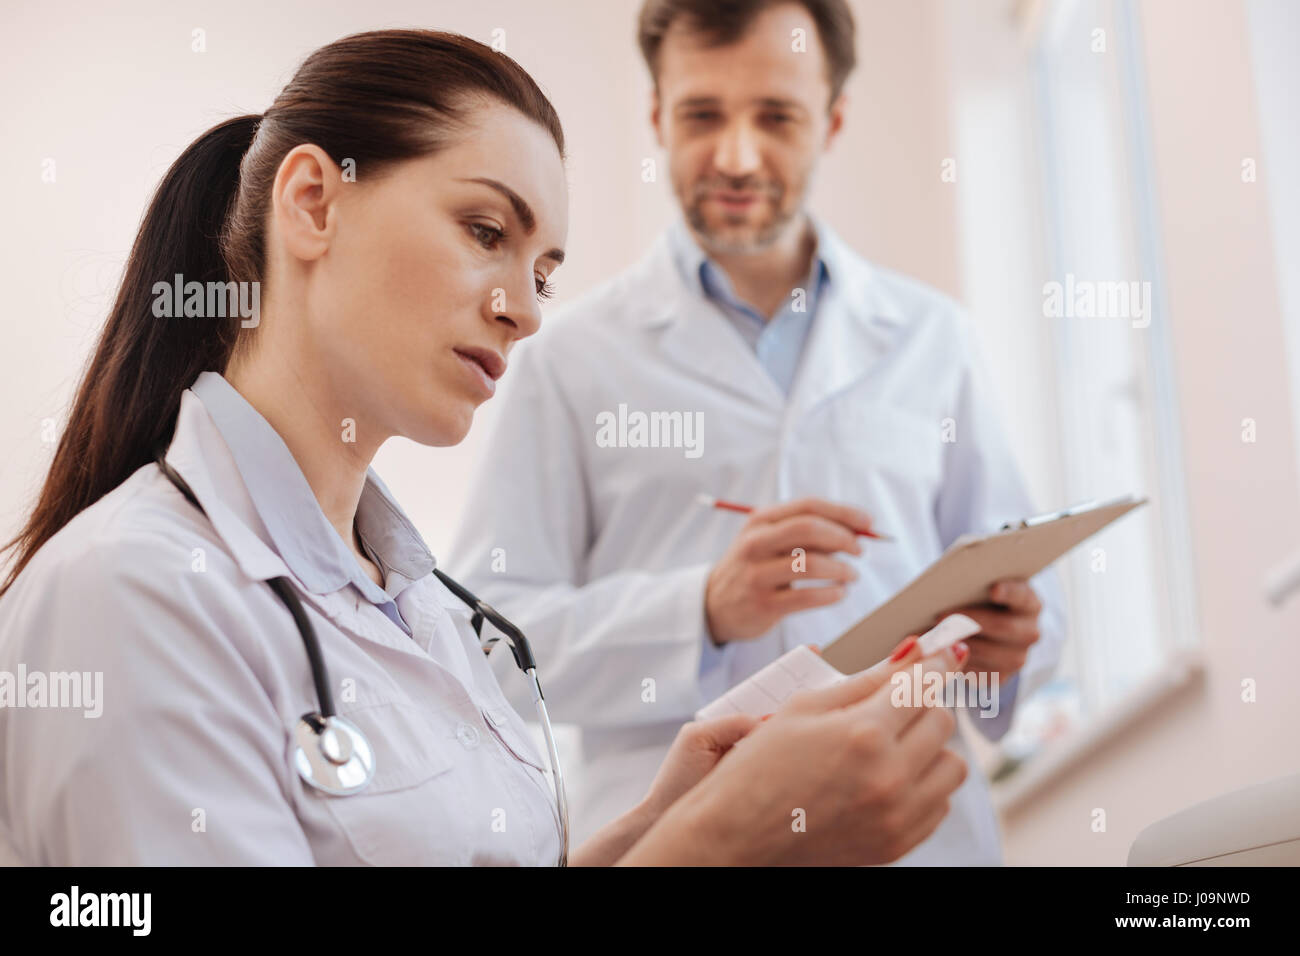 Competent capable cardiologist looking focused Stock Photo